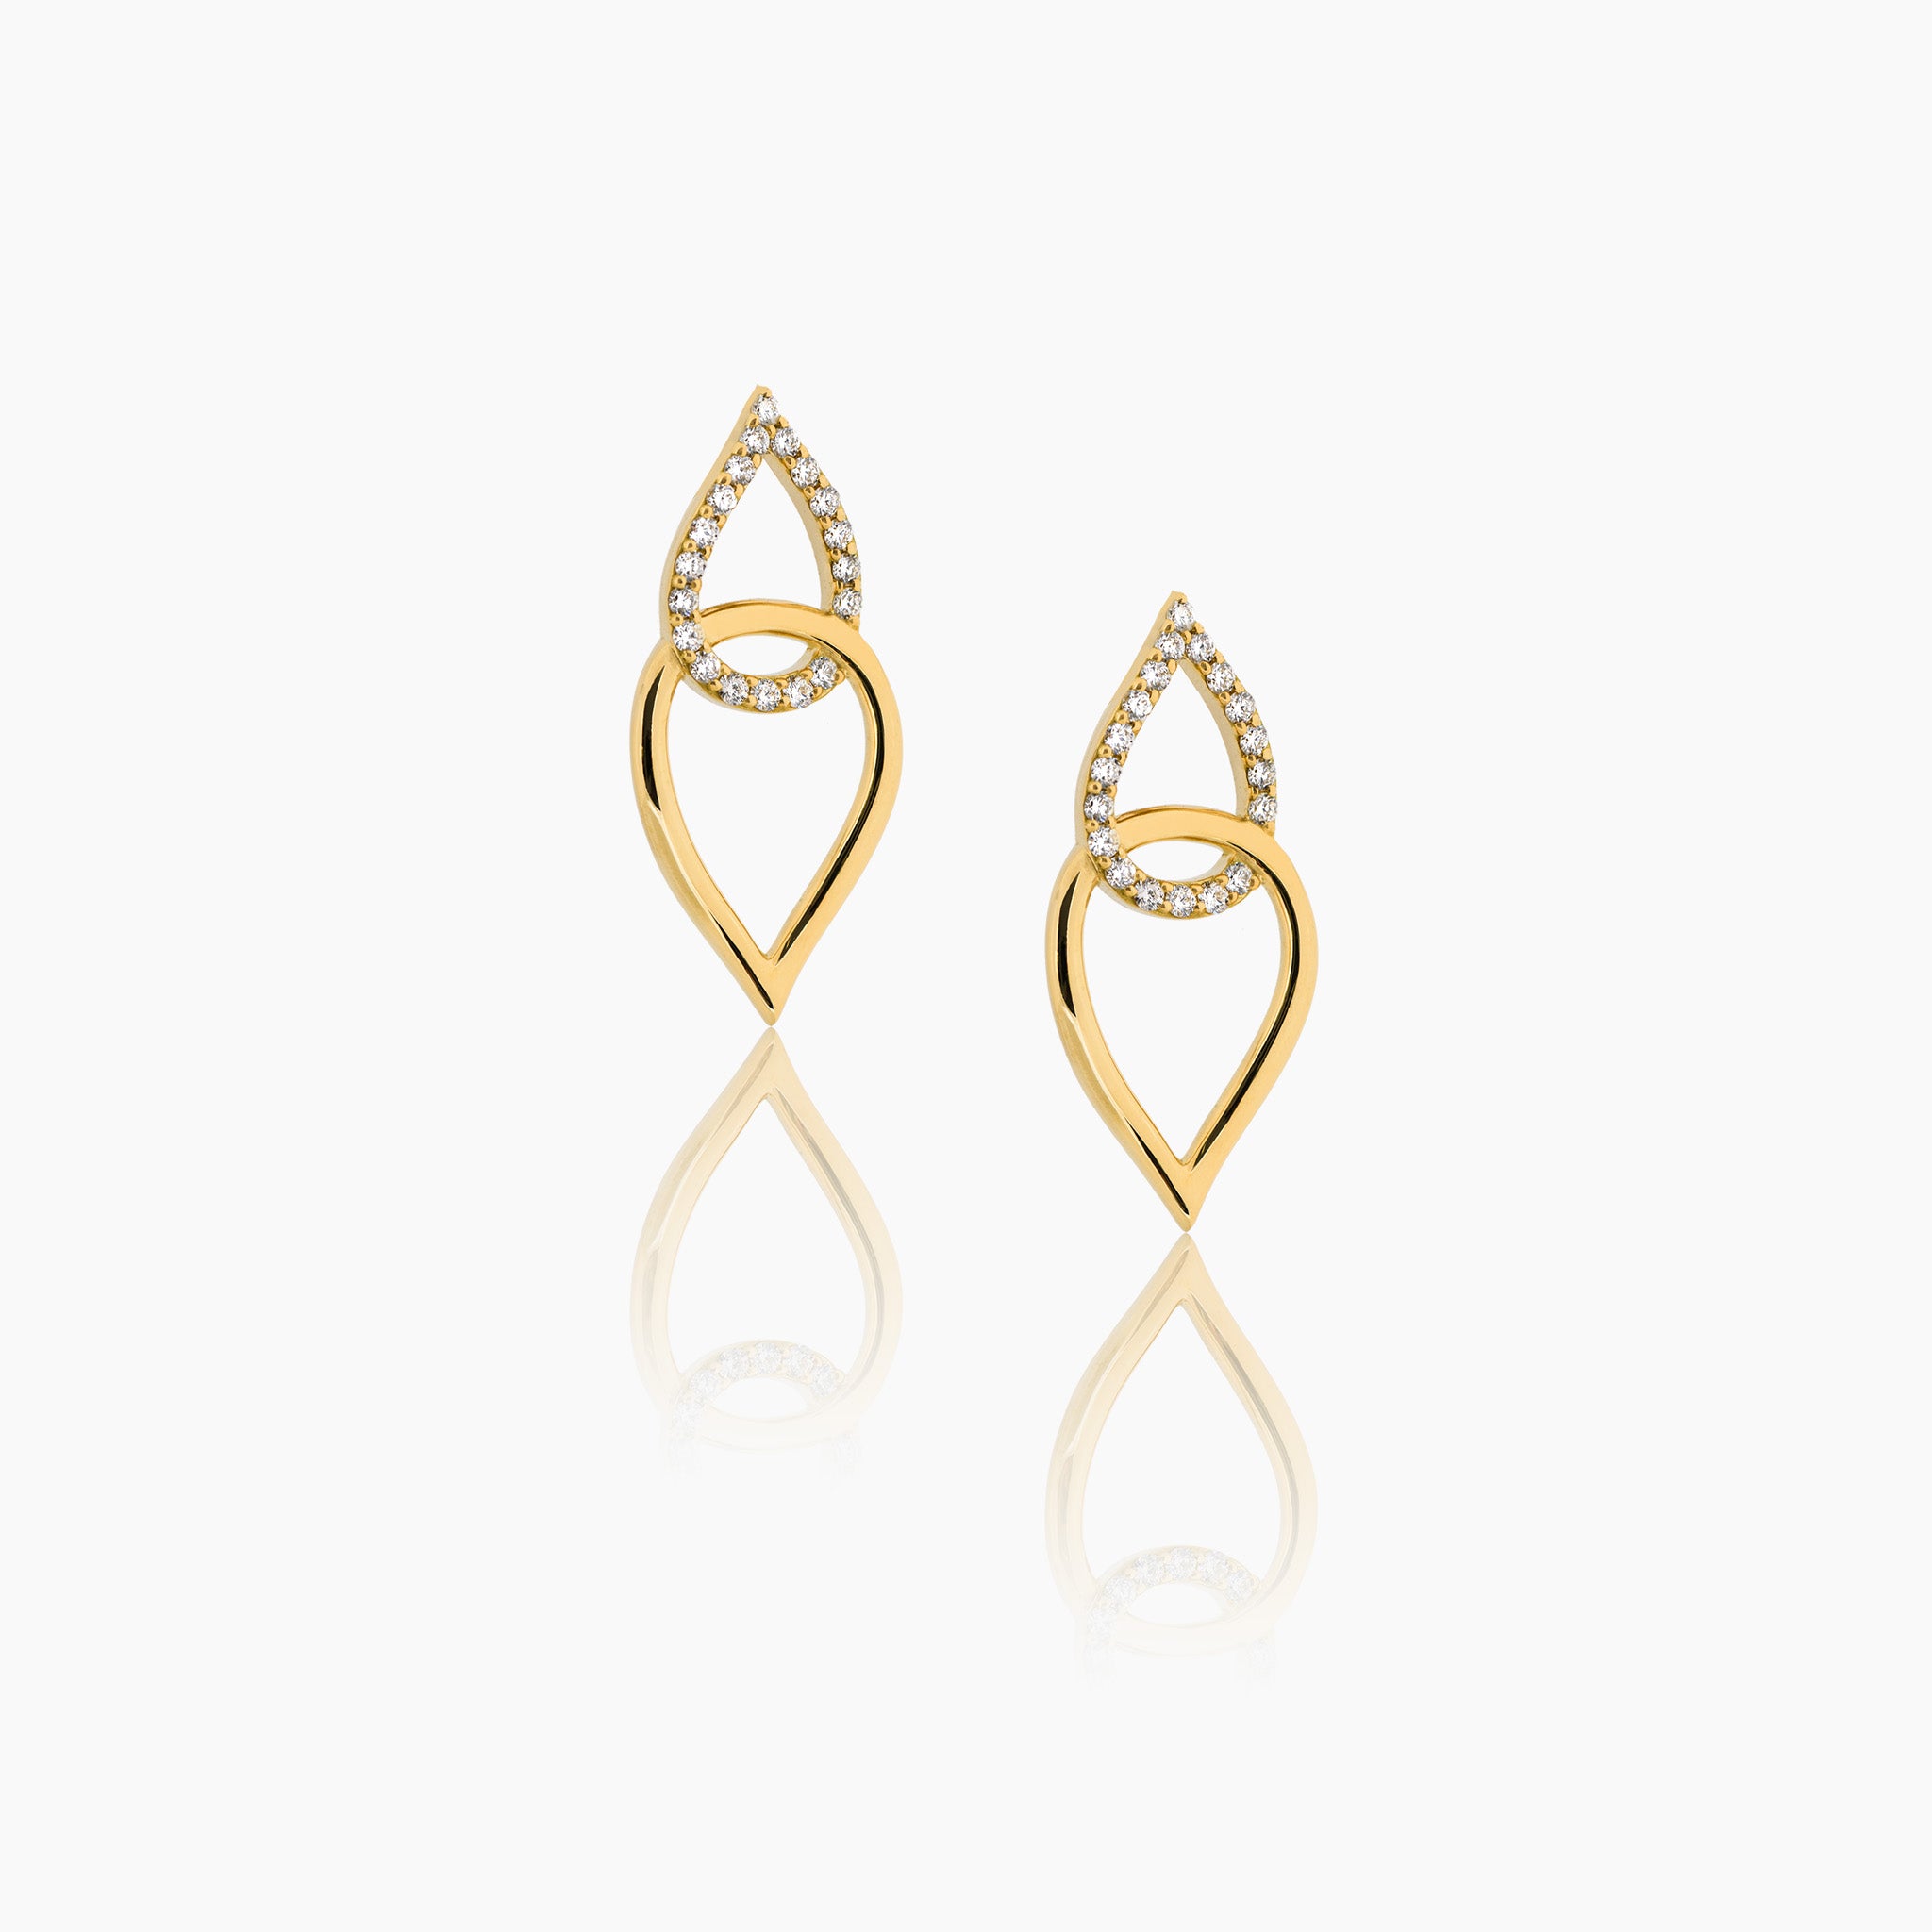 Yellow gold earrings inspired by sea knots, adorned with sparkling diamonds, showcased against an off-white background.